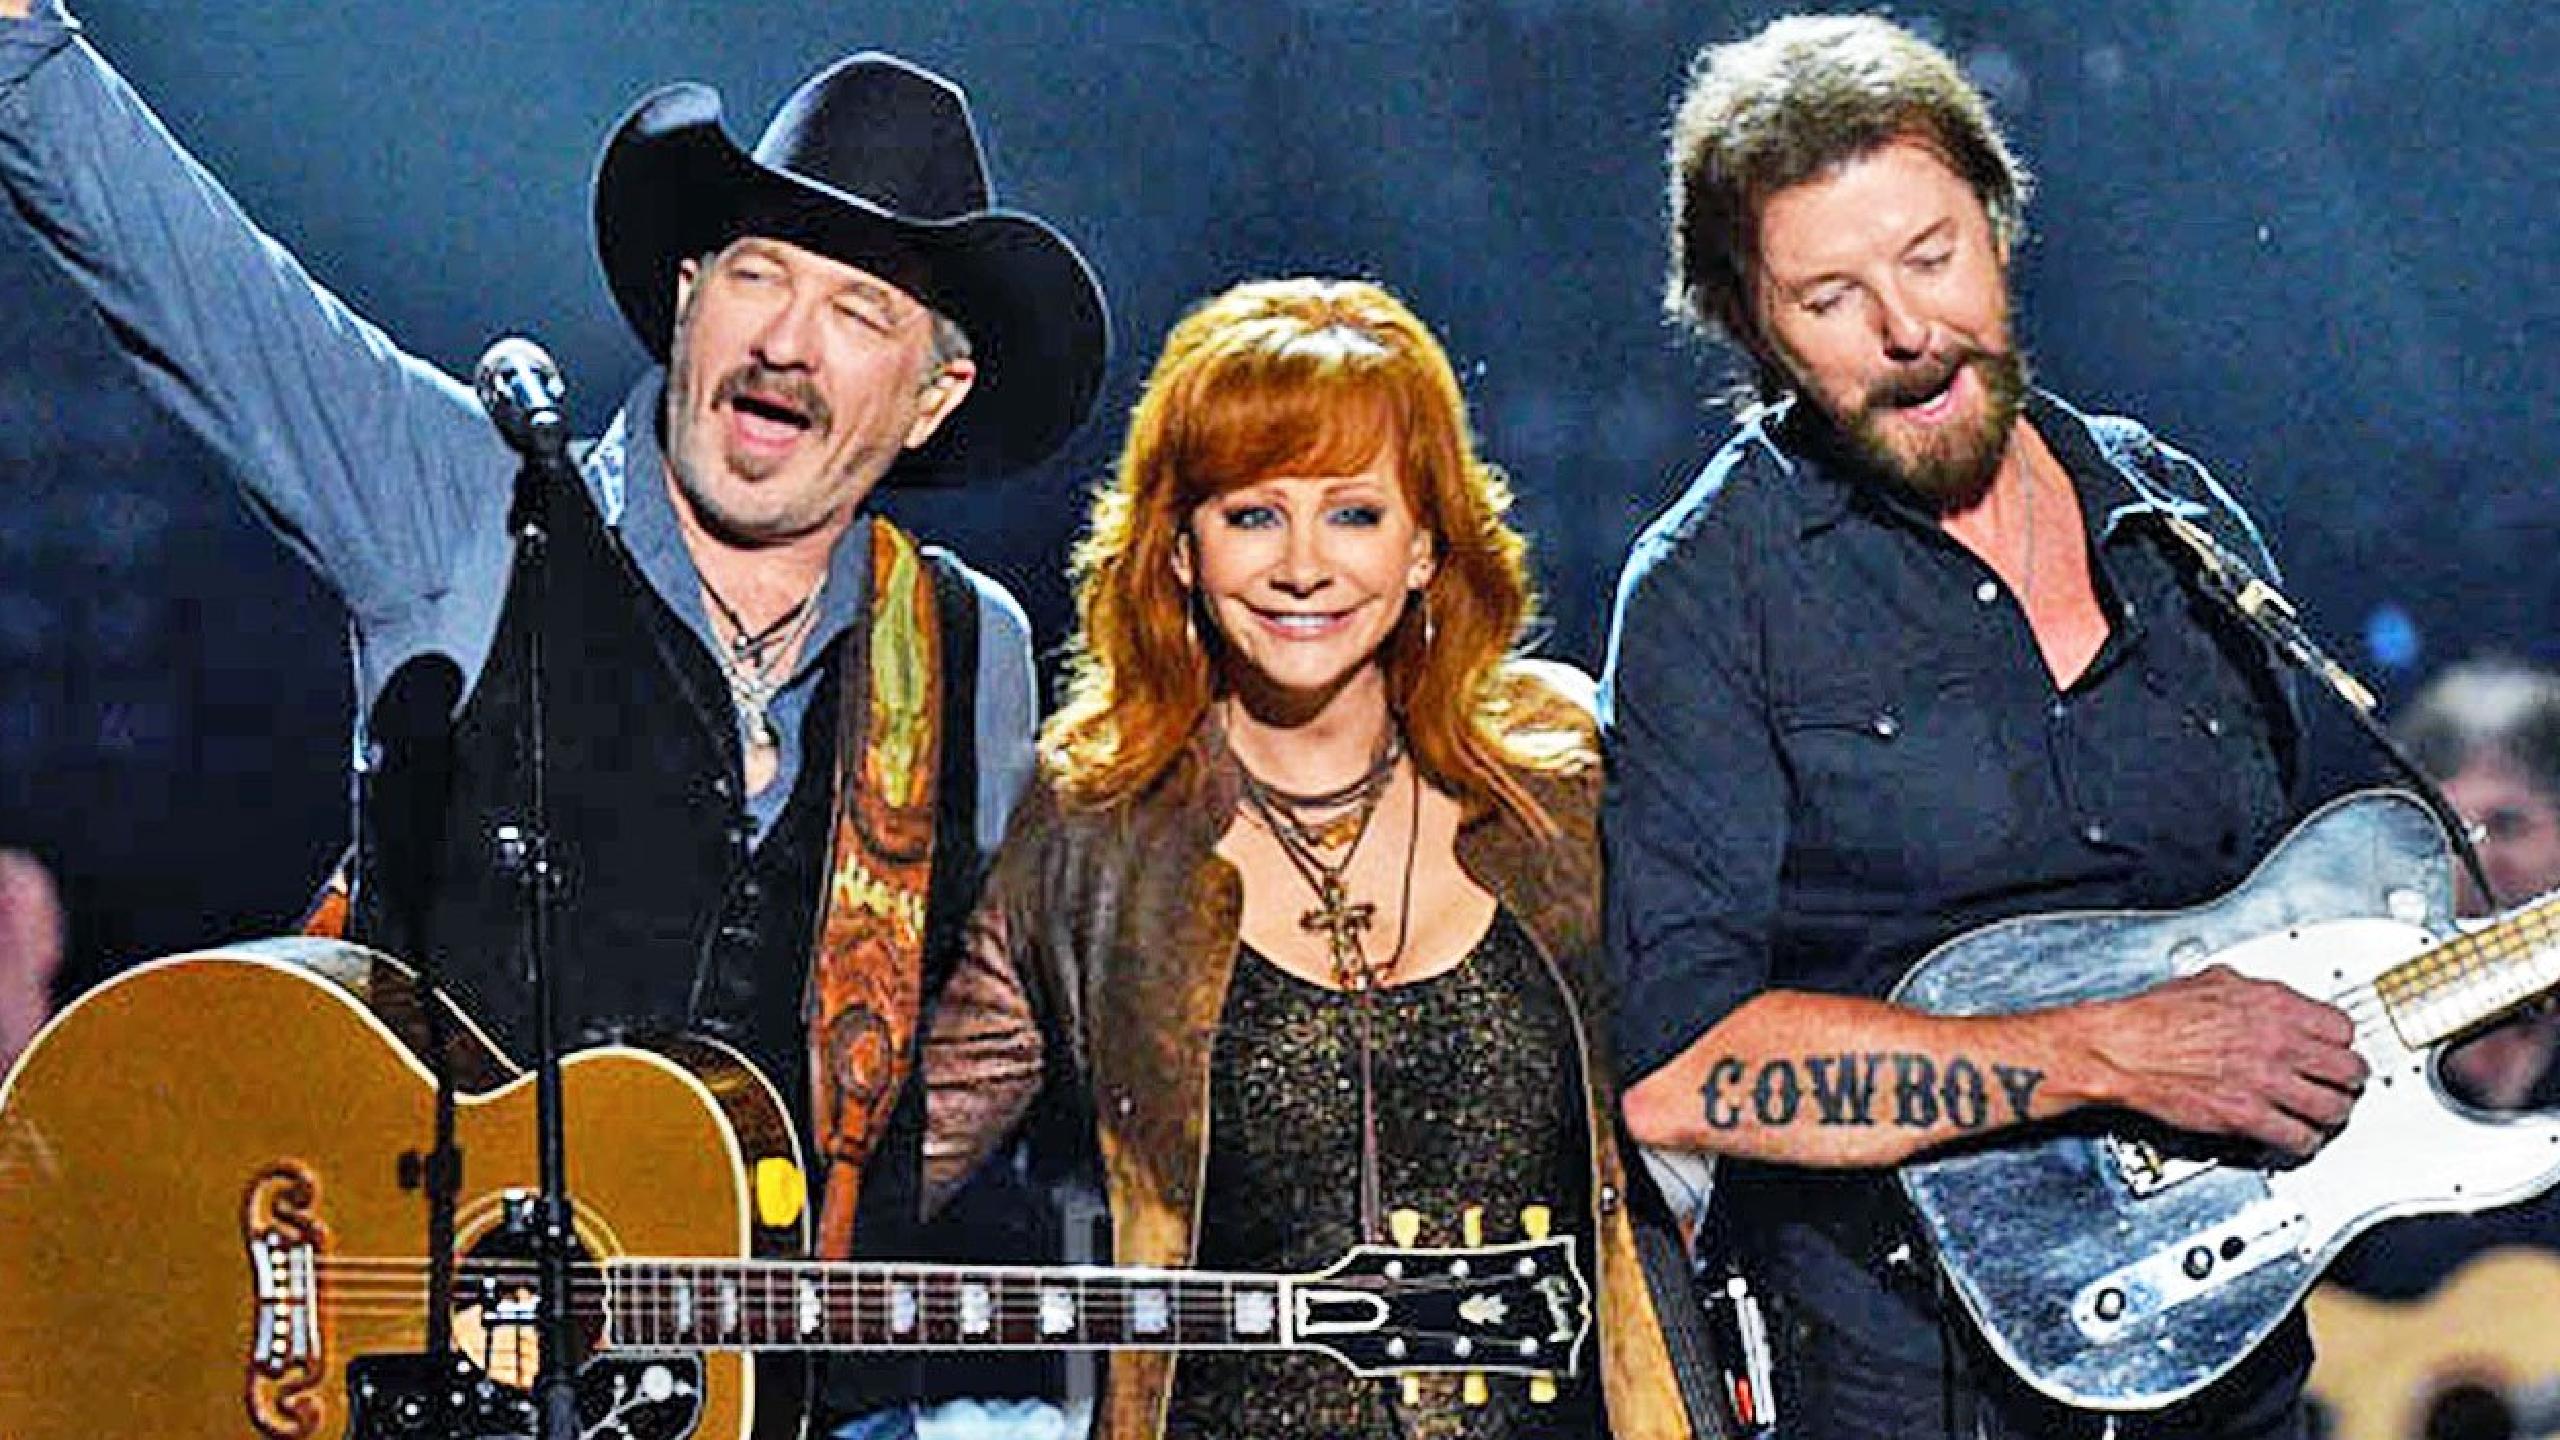 Reba and Brooks and Dunn tour dates 2020 2021. Reba and Brooks and Dunn tickets and concerts. Wegow Great Britain